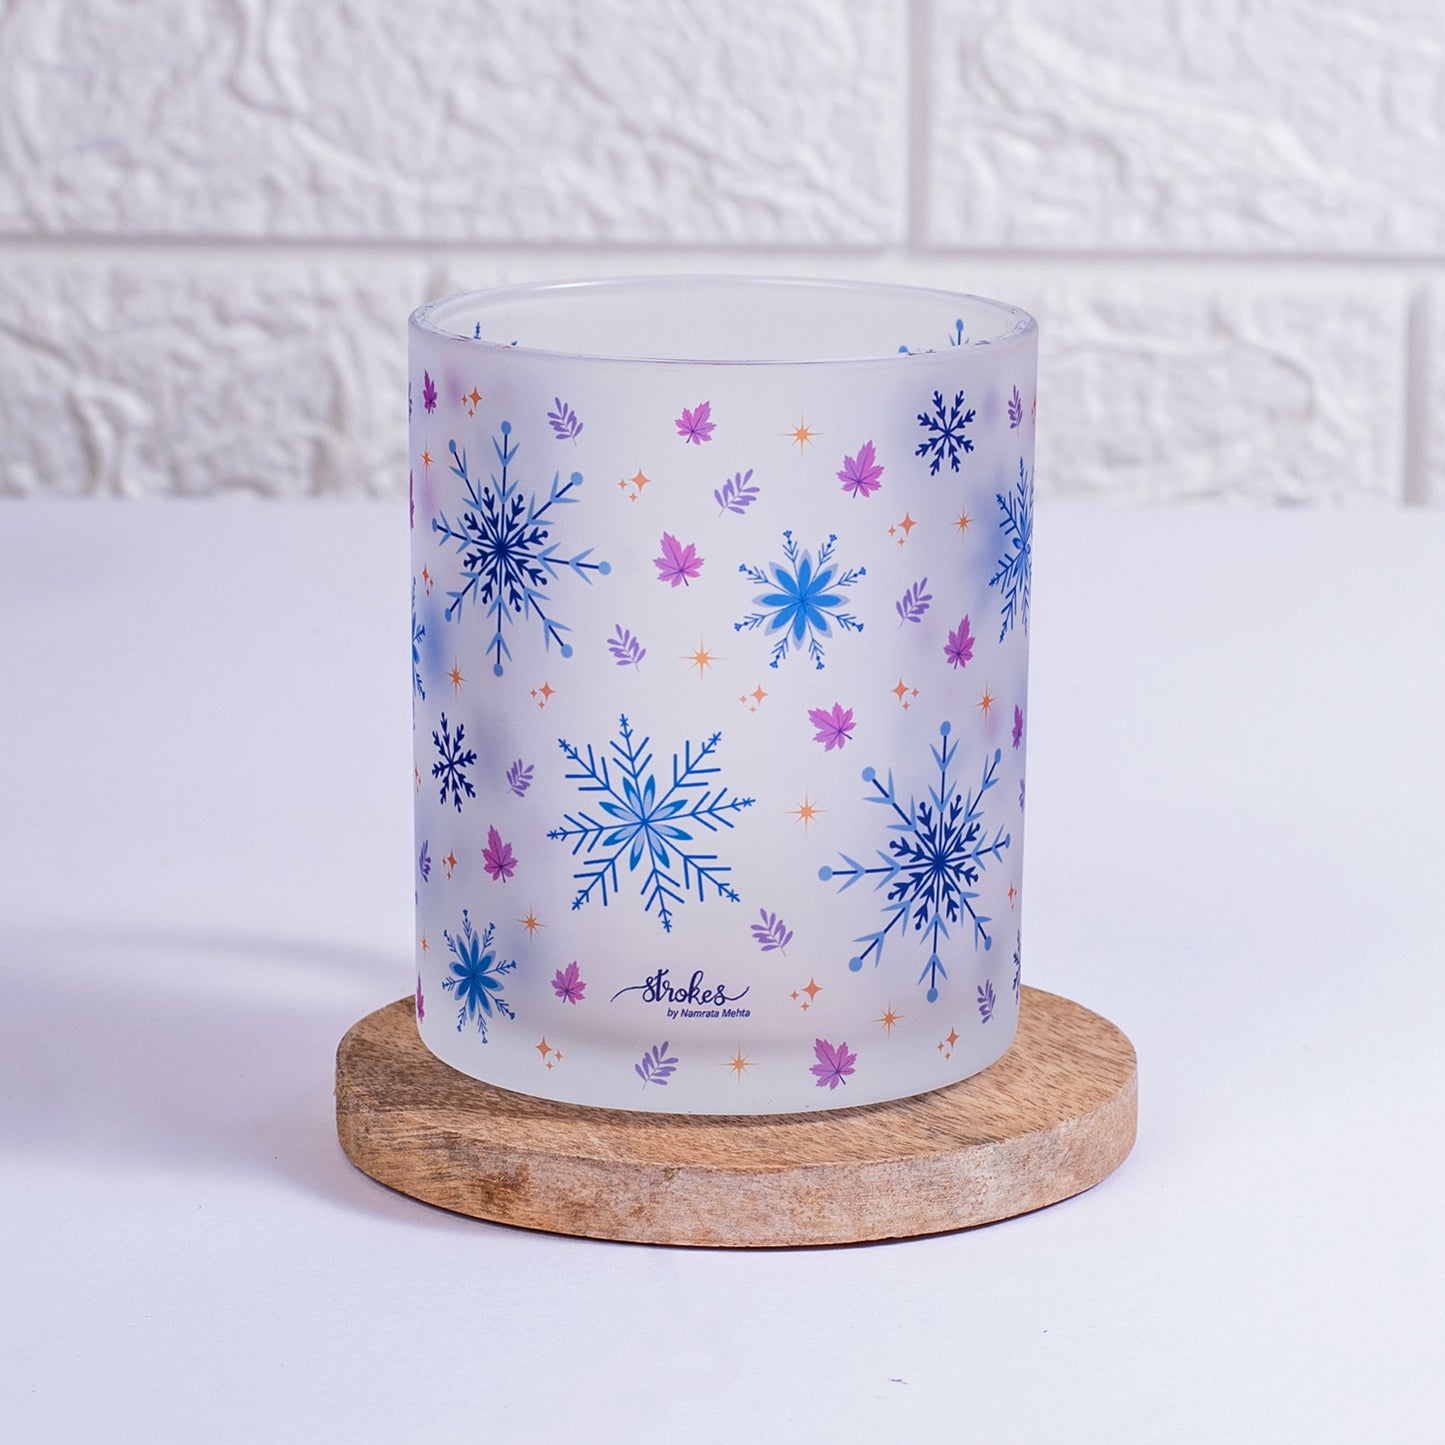 Whistling Snowflakes Frosted Glass Mug